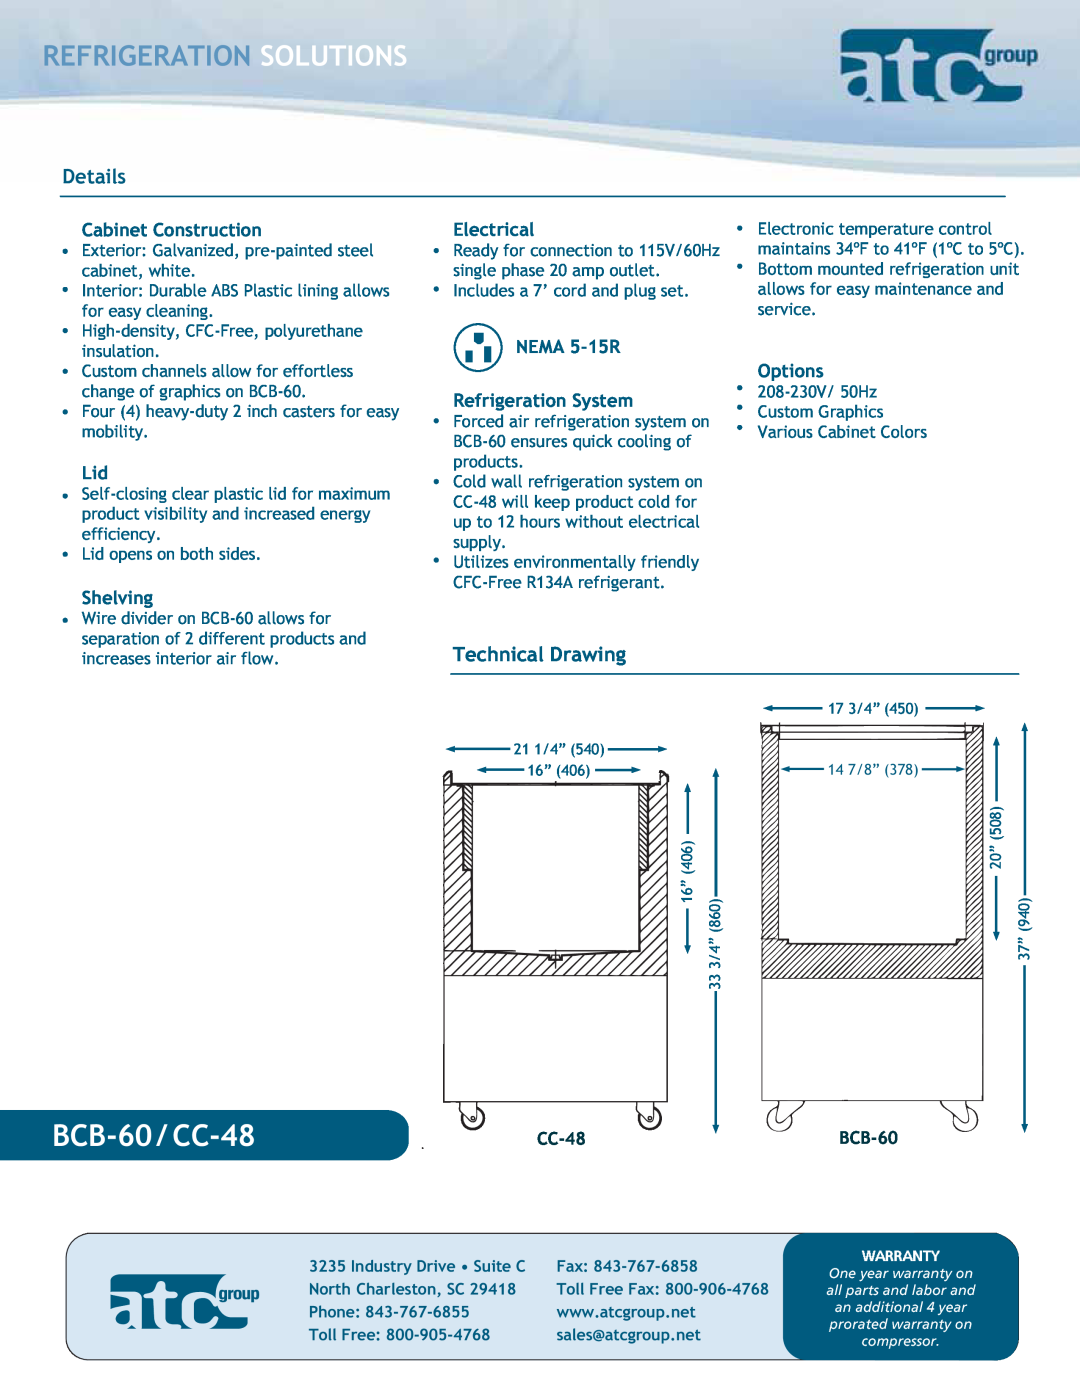 ATC Group BCB-60 / CC-48, Refrigeration Solutions, Details, Technical Drawing, Cabinet Construction, Shelving, Options 